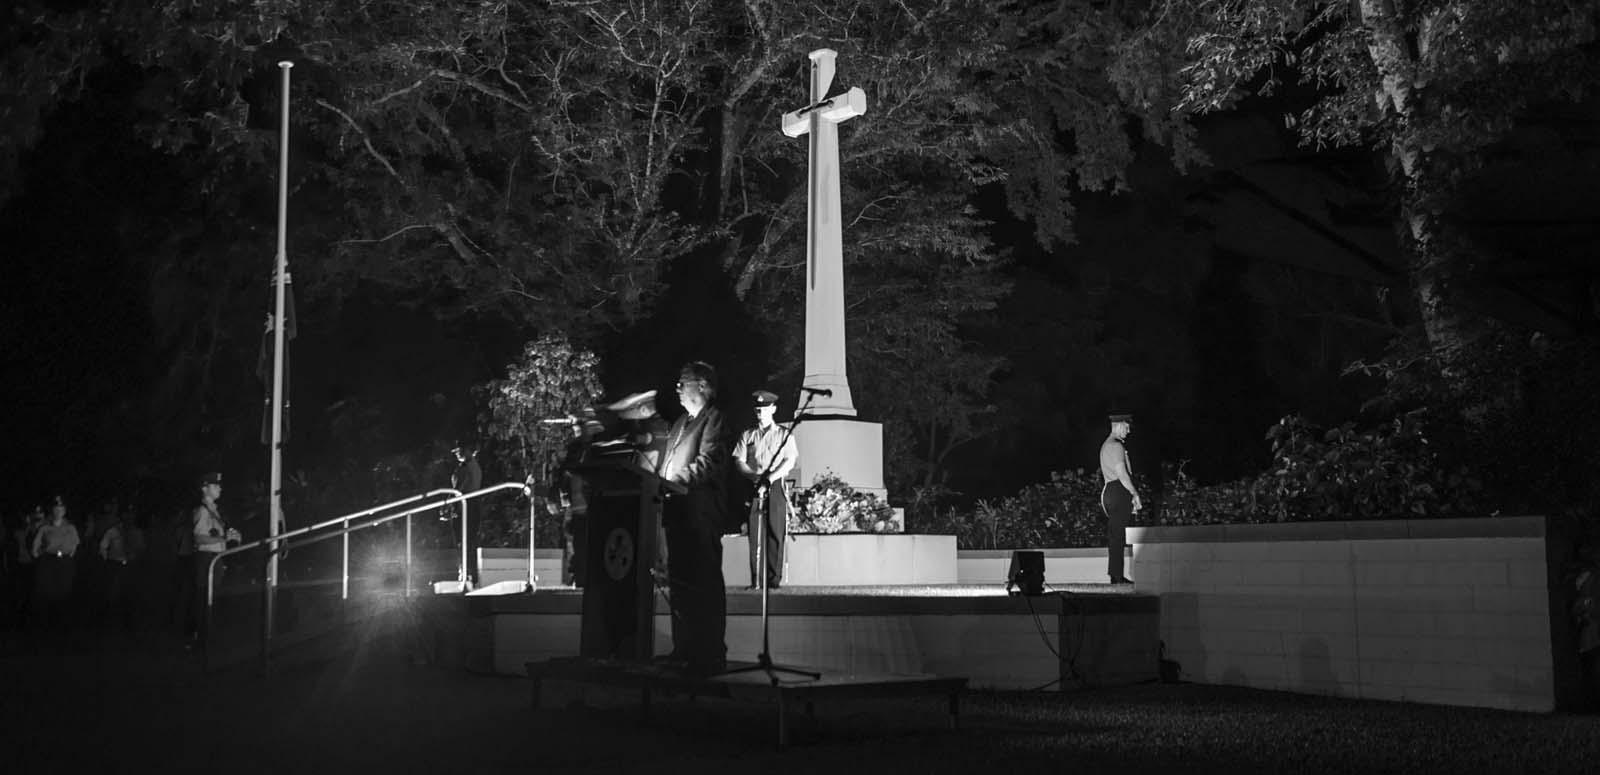 Anzac Day dawn service held at Adelaide River in Darwin, 2017